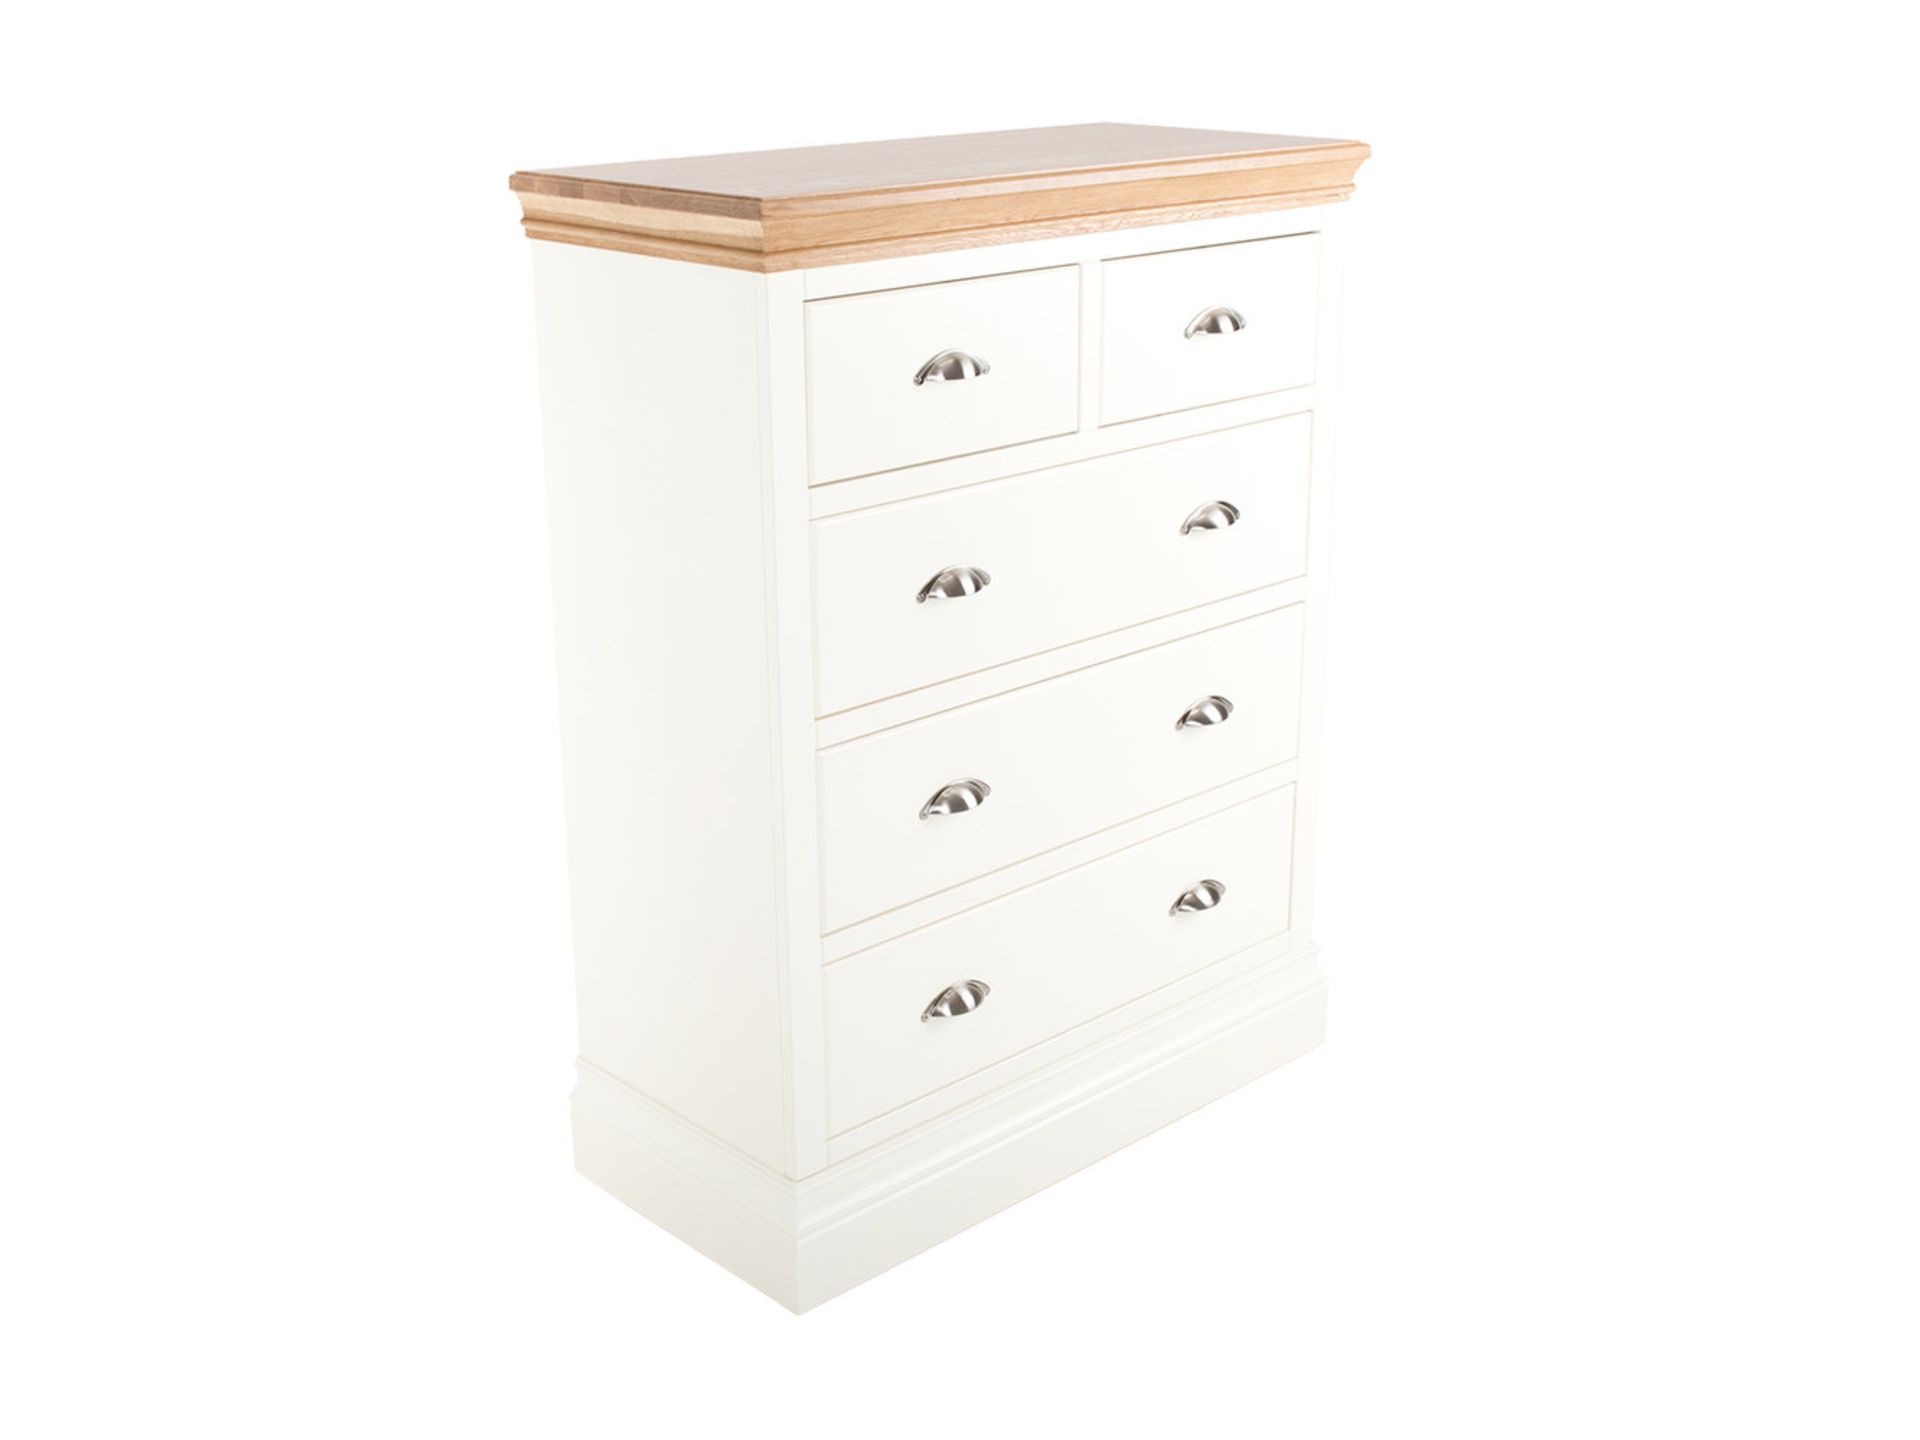 1 x Clement 3+2 Chest of Bedroom Drawers By Brewers Home - Solid Wood Painted Furniture Finished - Image 2 of 6